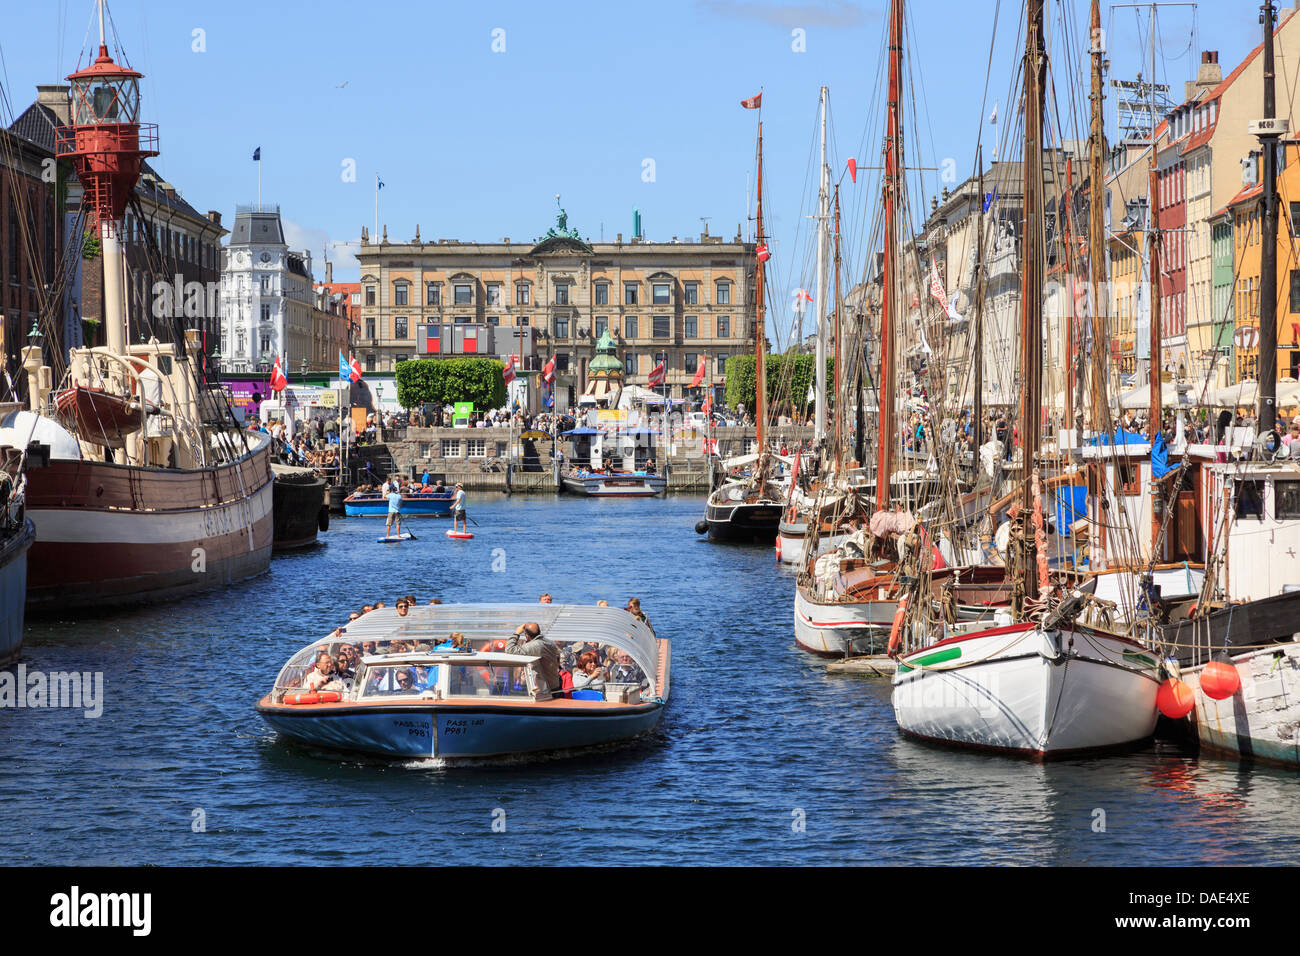 Tourists on canal tour boat with old wooden boats moored in Nyhavn harbour, Copenhagen, Zealand, Denmark, Scandinavia Stock Photo